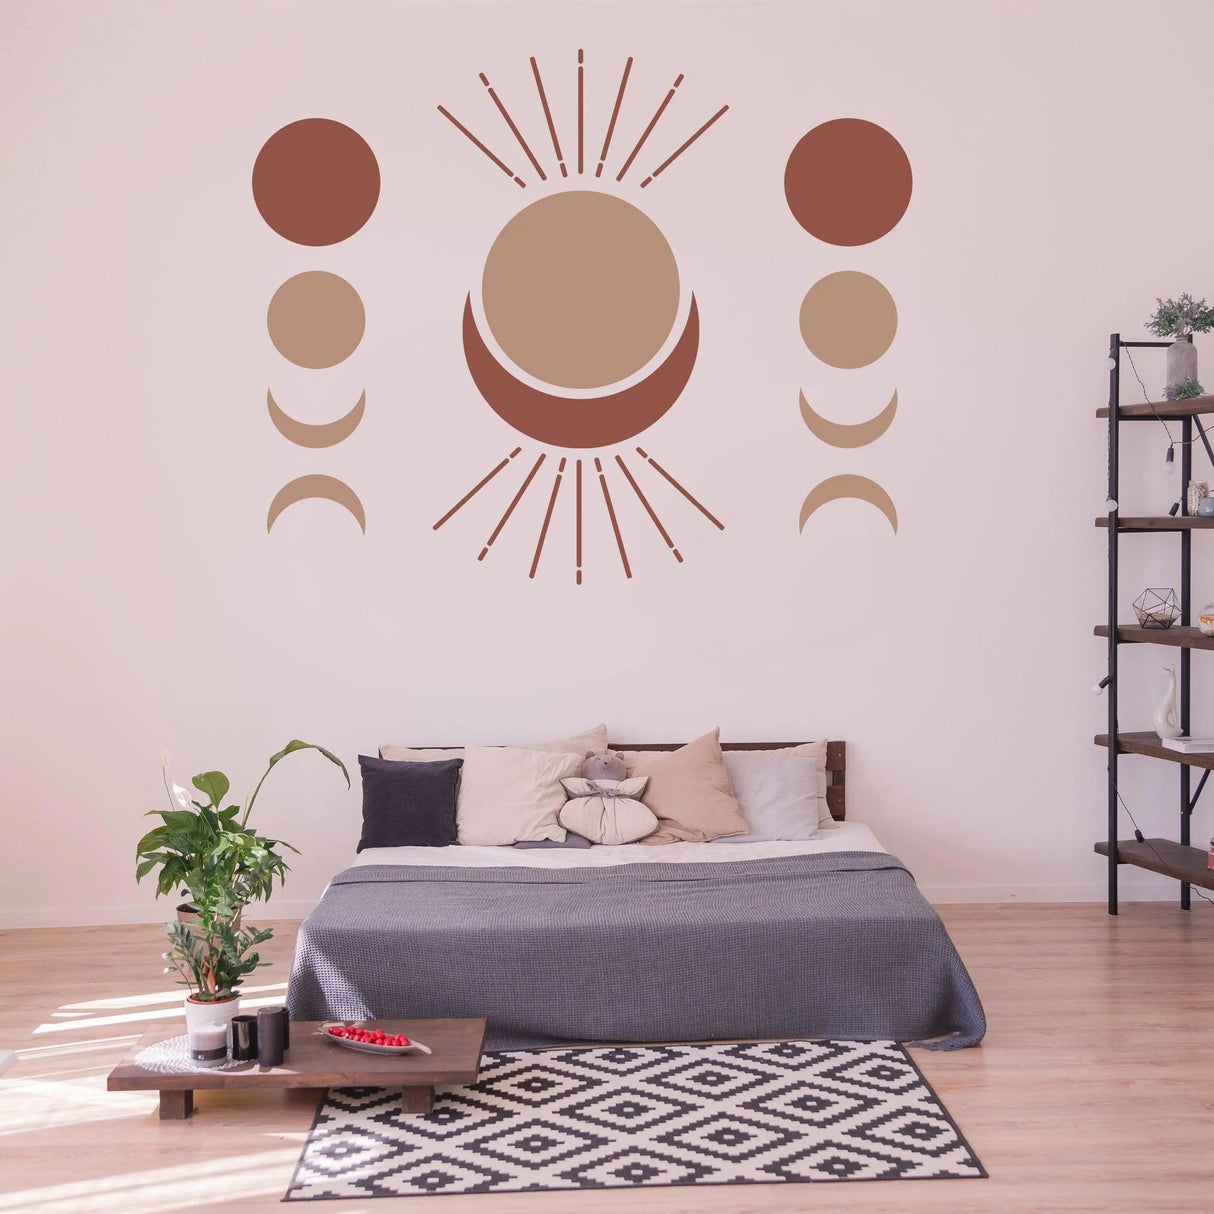 Boho Moon Phases Wall Decal Decor - Bohemian Crescent Big Vinyl Wallpaper Sticker For Or Nursery Kid Room - Large Pastel Art Girl Baby Mural - Decords